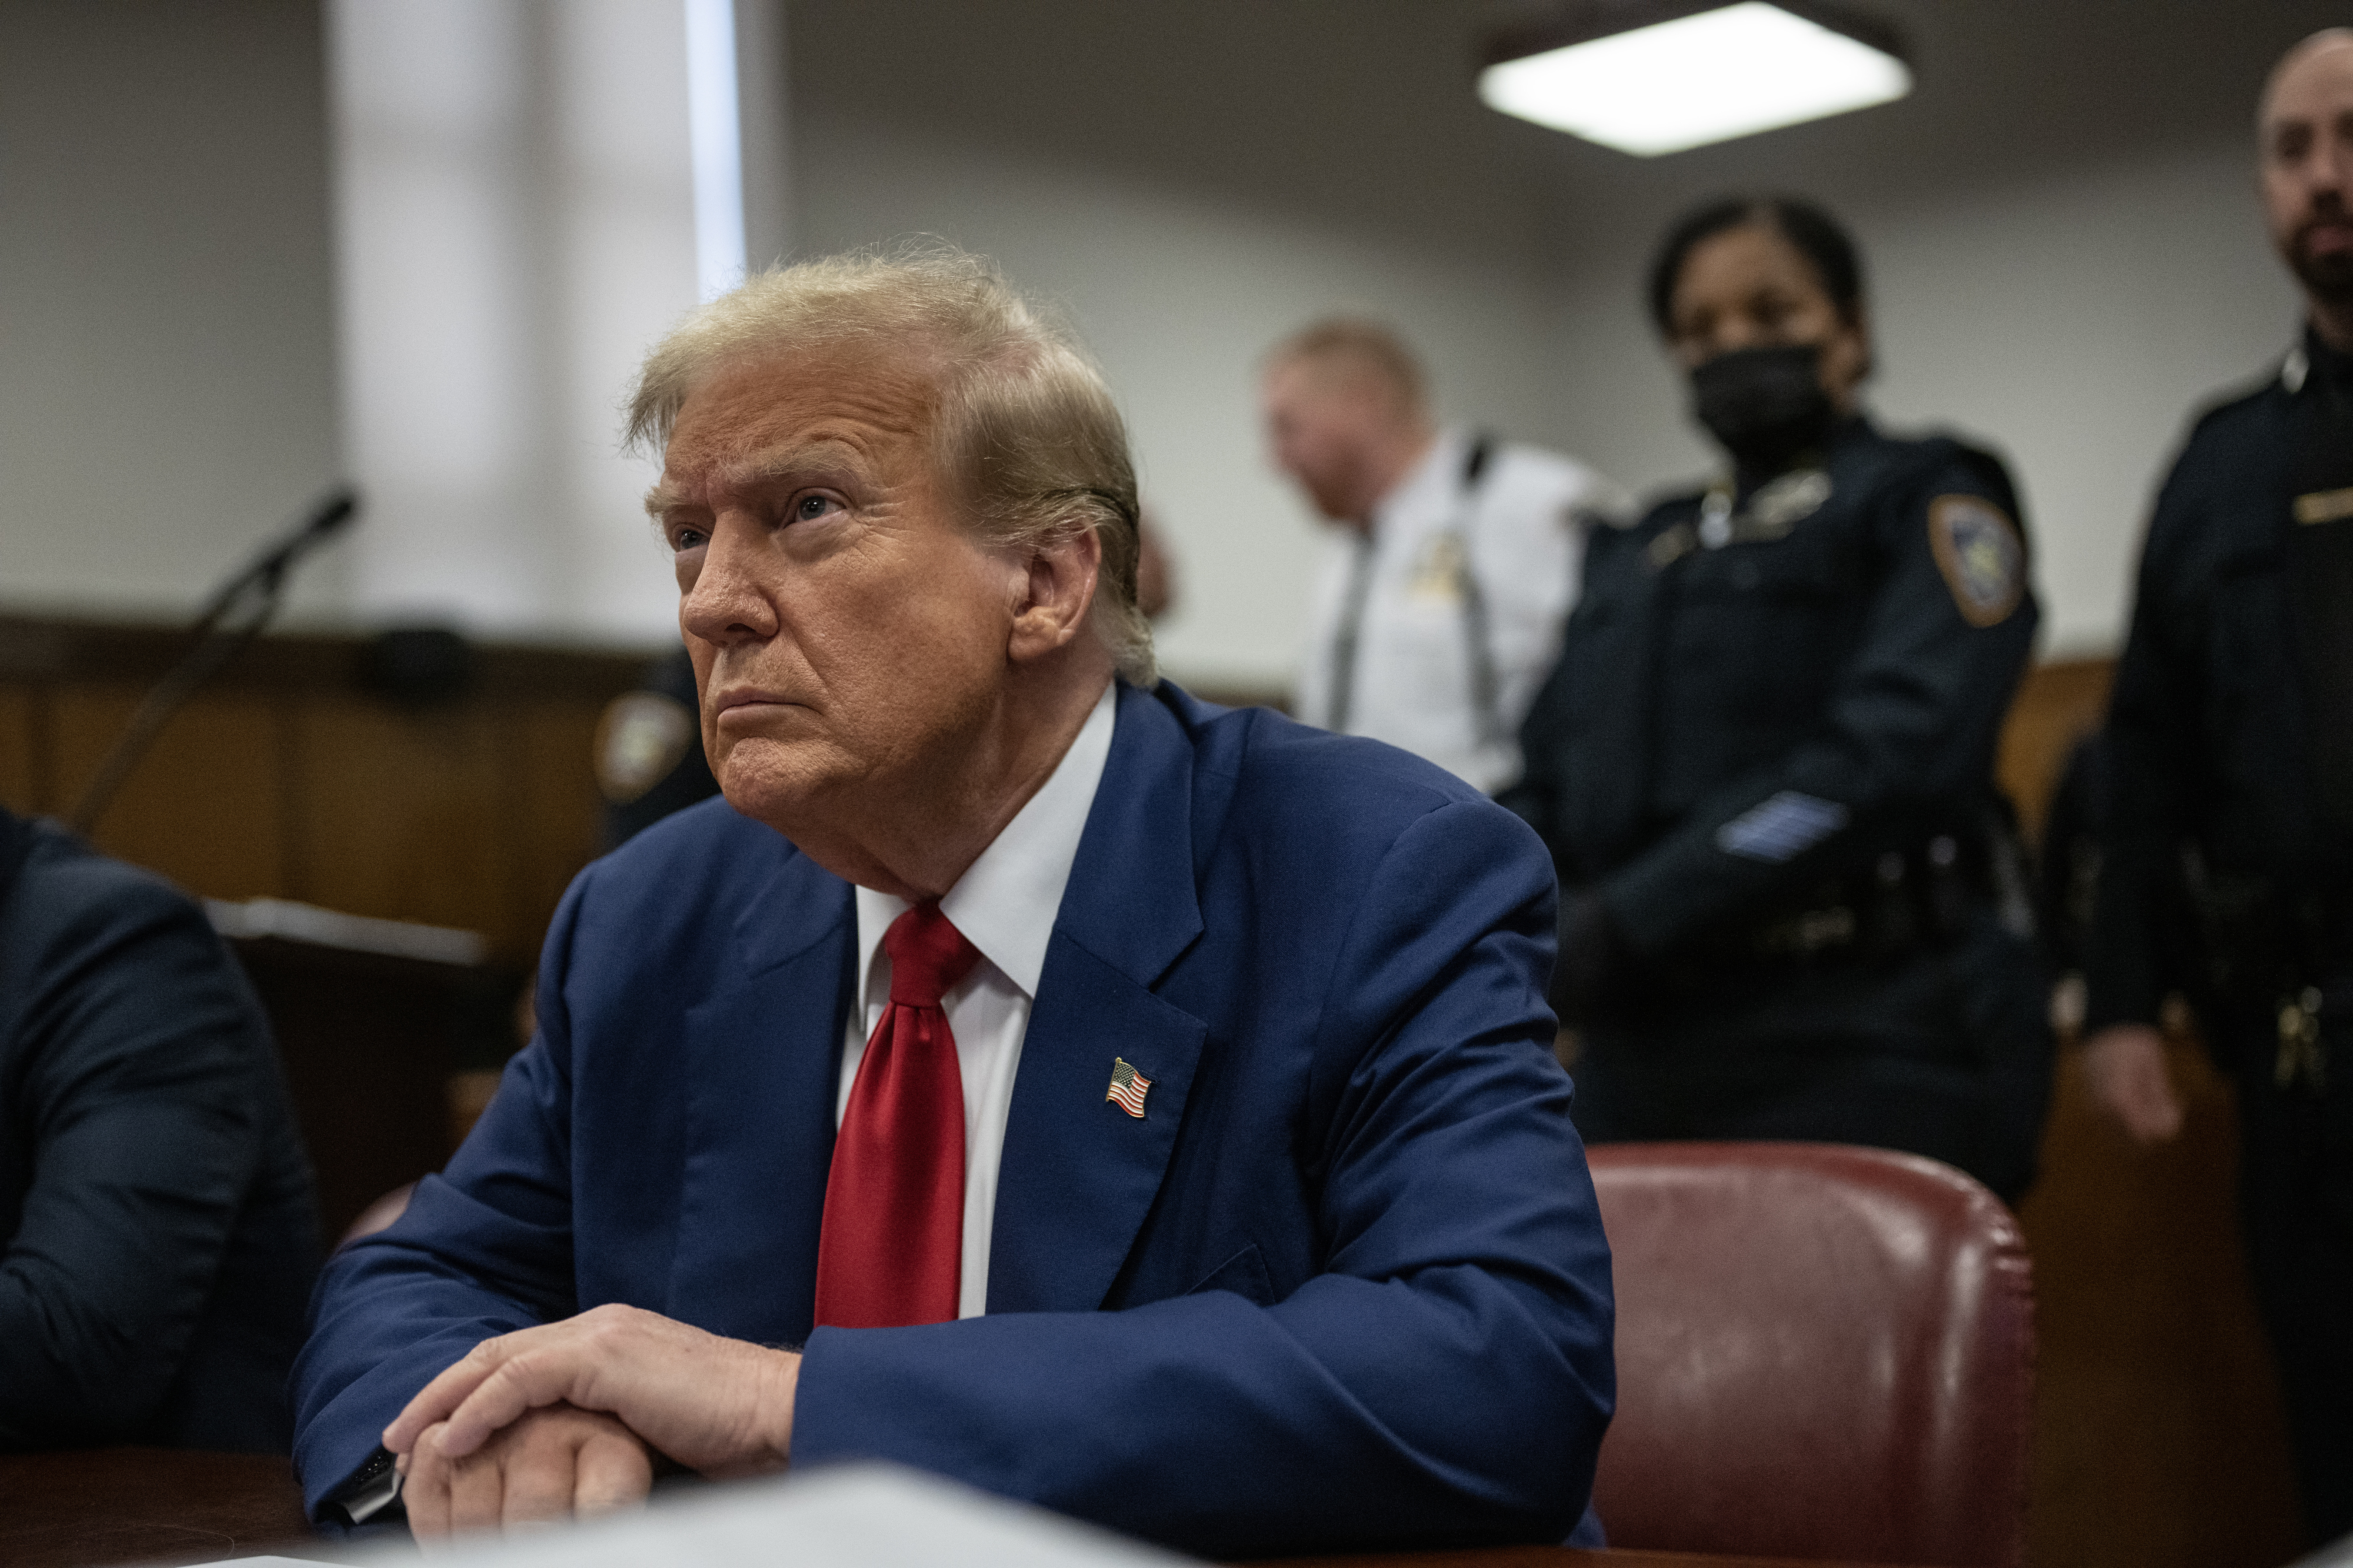 Donald Trump seated in a courtroom with security personnel standing behind him